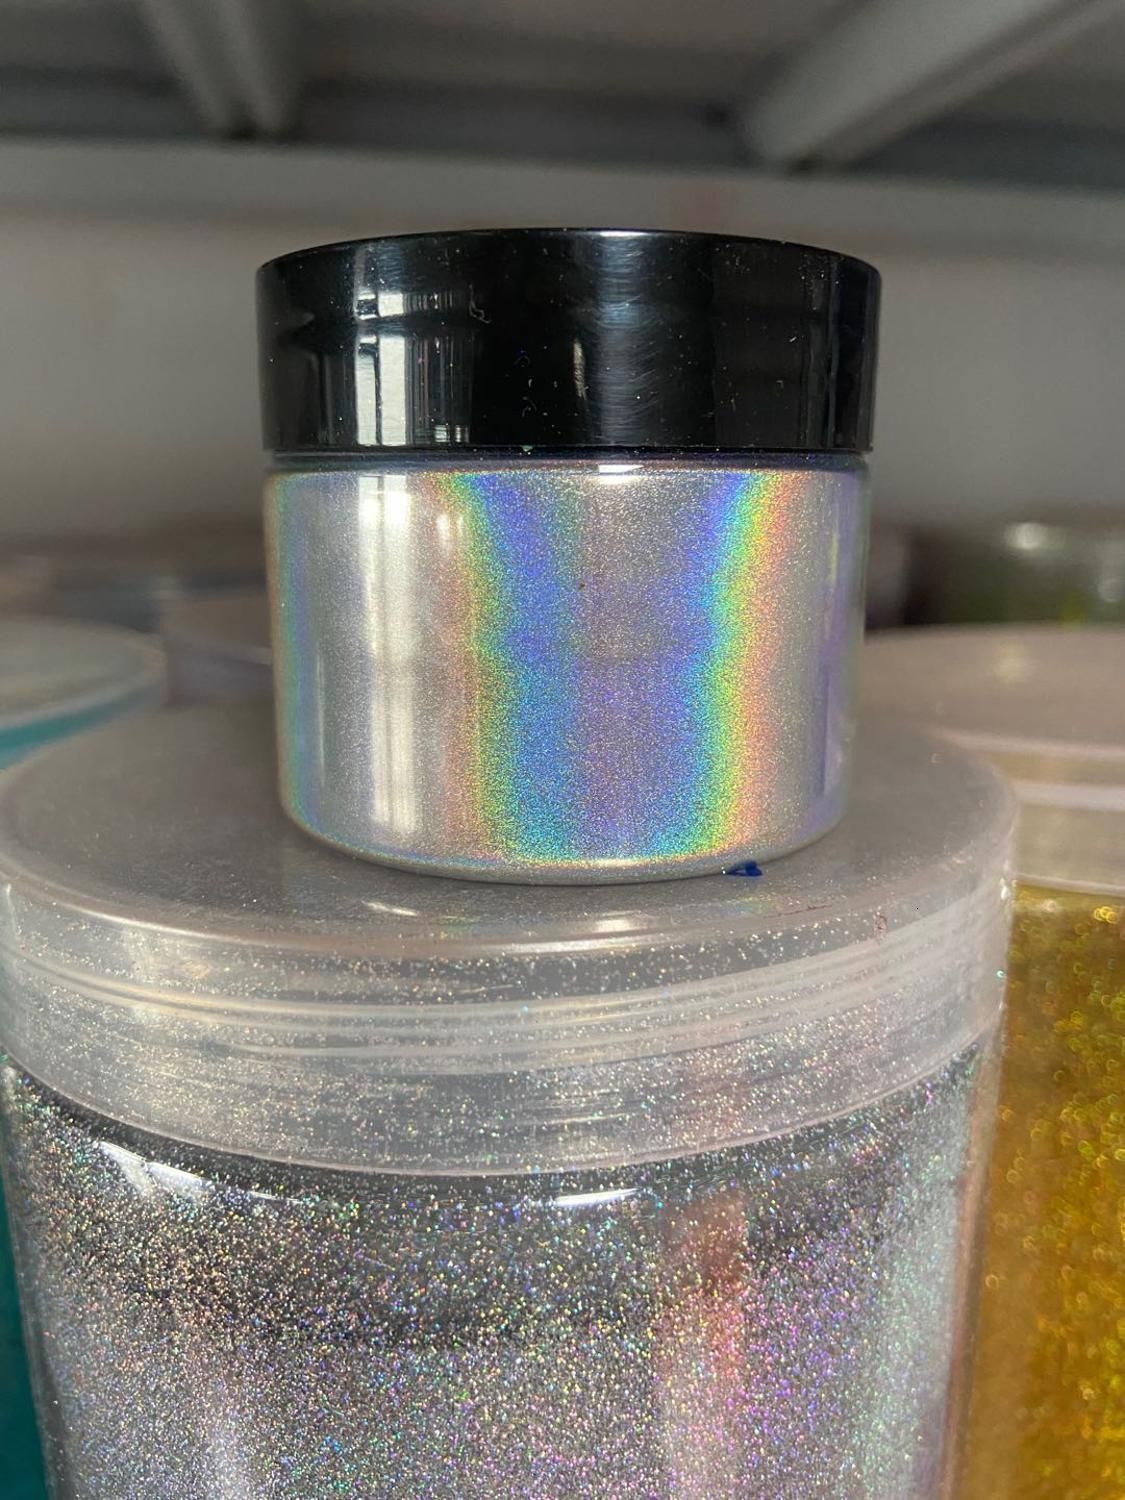 Nail Glitter Fine 35um Silver Chameleon Pigment Holo Nail Glitter For Nail  Art Eyeshadow Nails Art Body Glittle Holographic Pigment DIY 230729 From  Dang09, $113.7